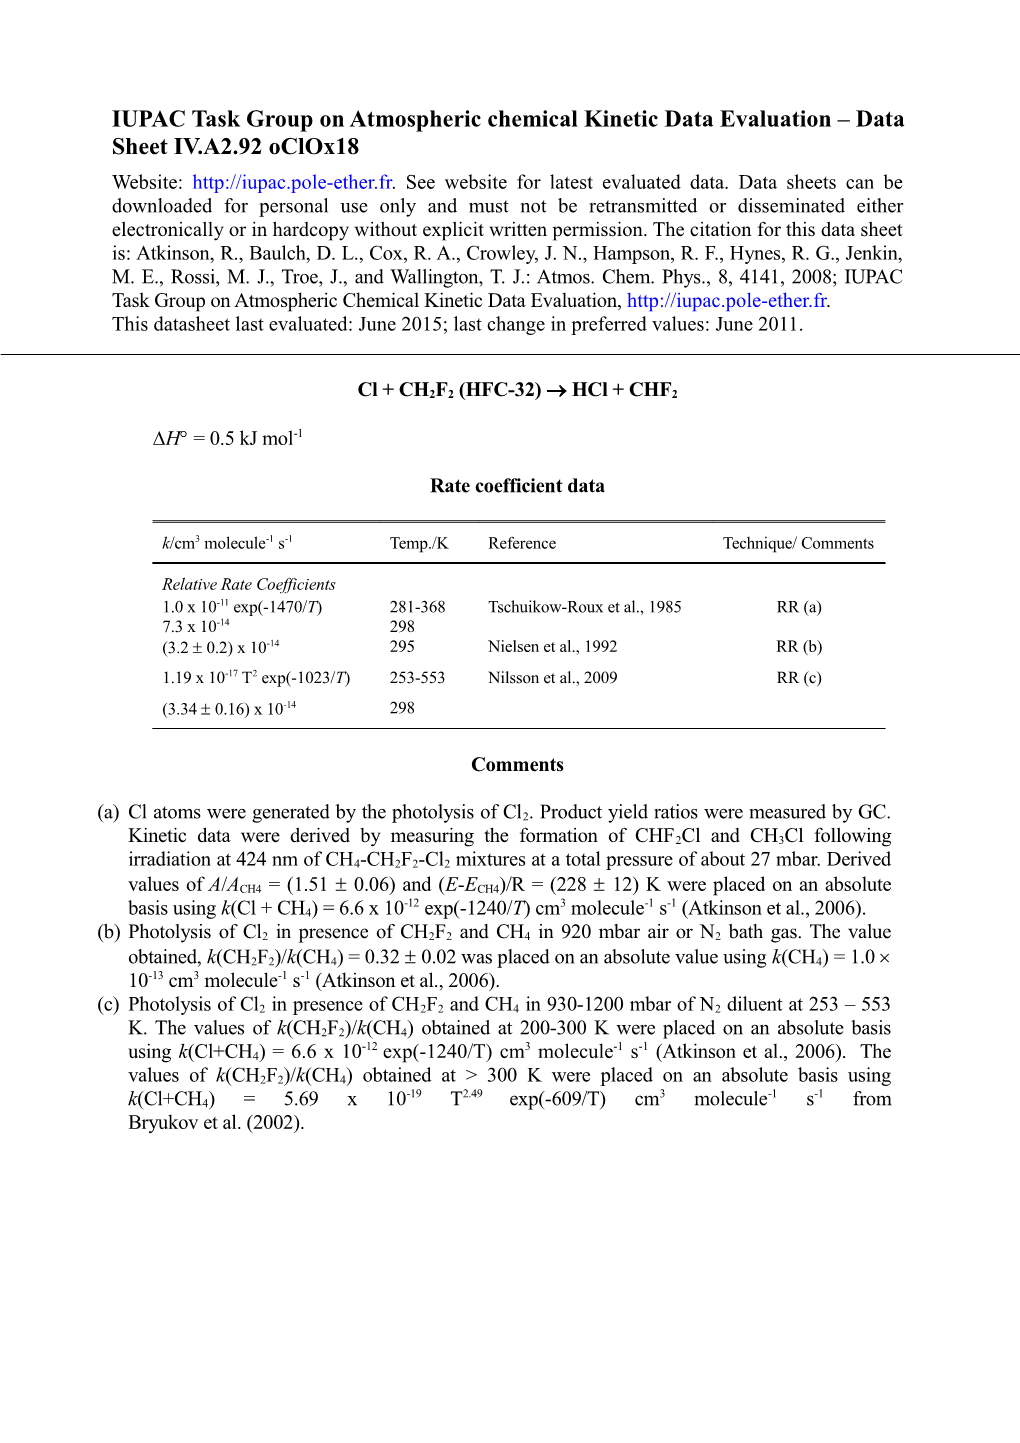 IUPAC Task Group on Atmospheric Chemical Kinetic Data Evaluation Data Sheet IV.A2.92 Oclox18